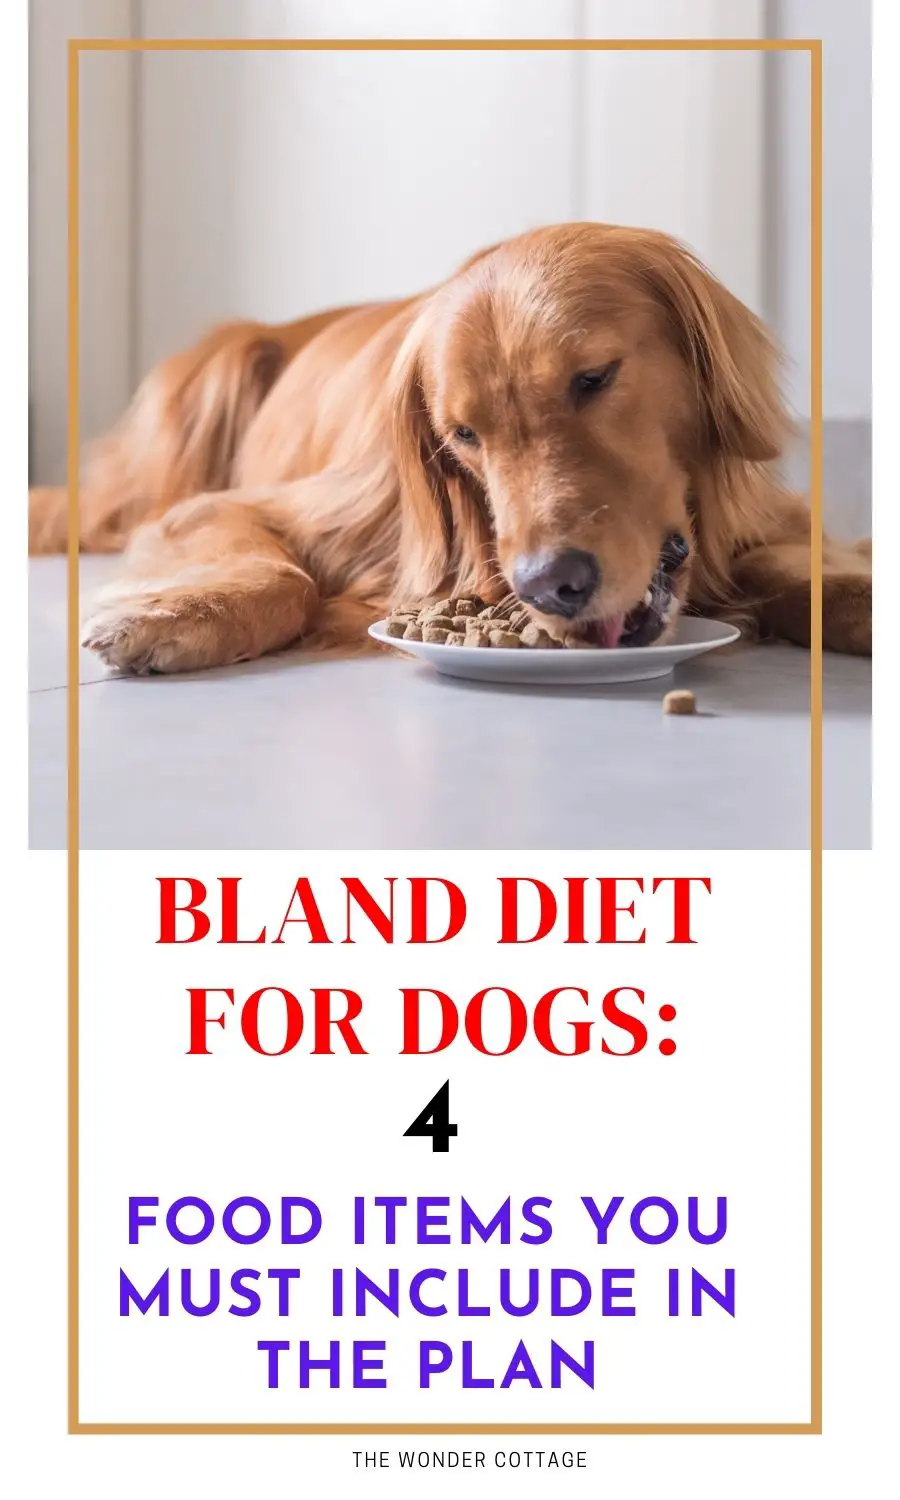 Bland Diet For Dogs: 4 Food Items You Must Include In The Plan